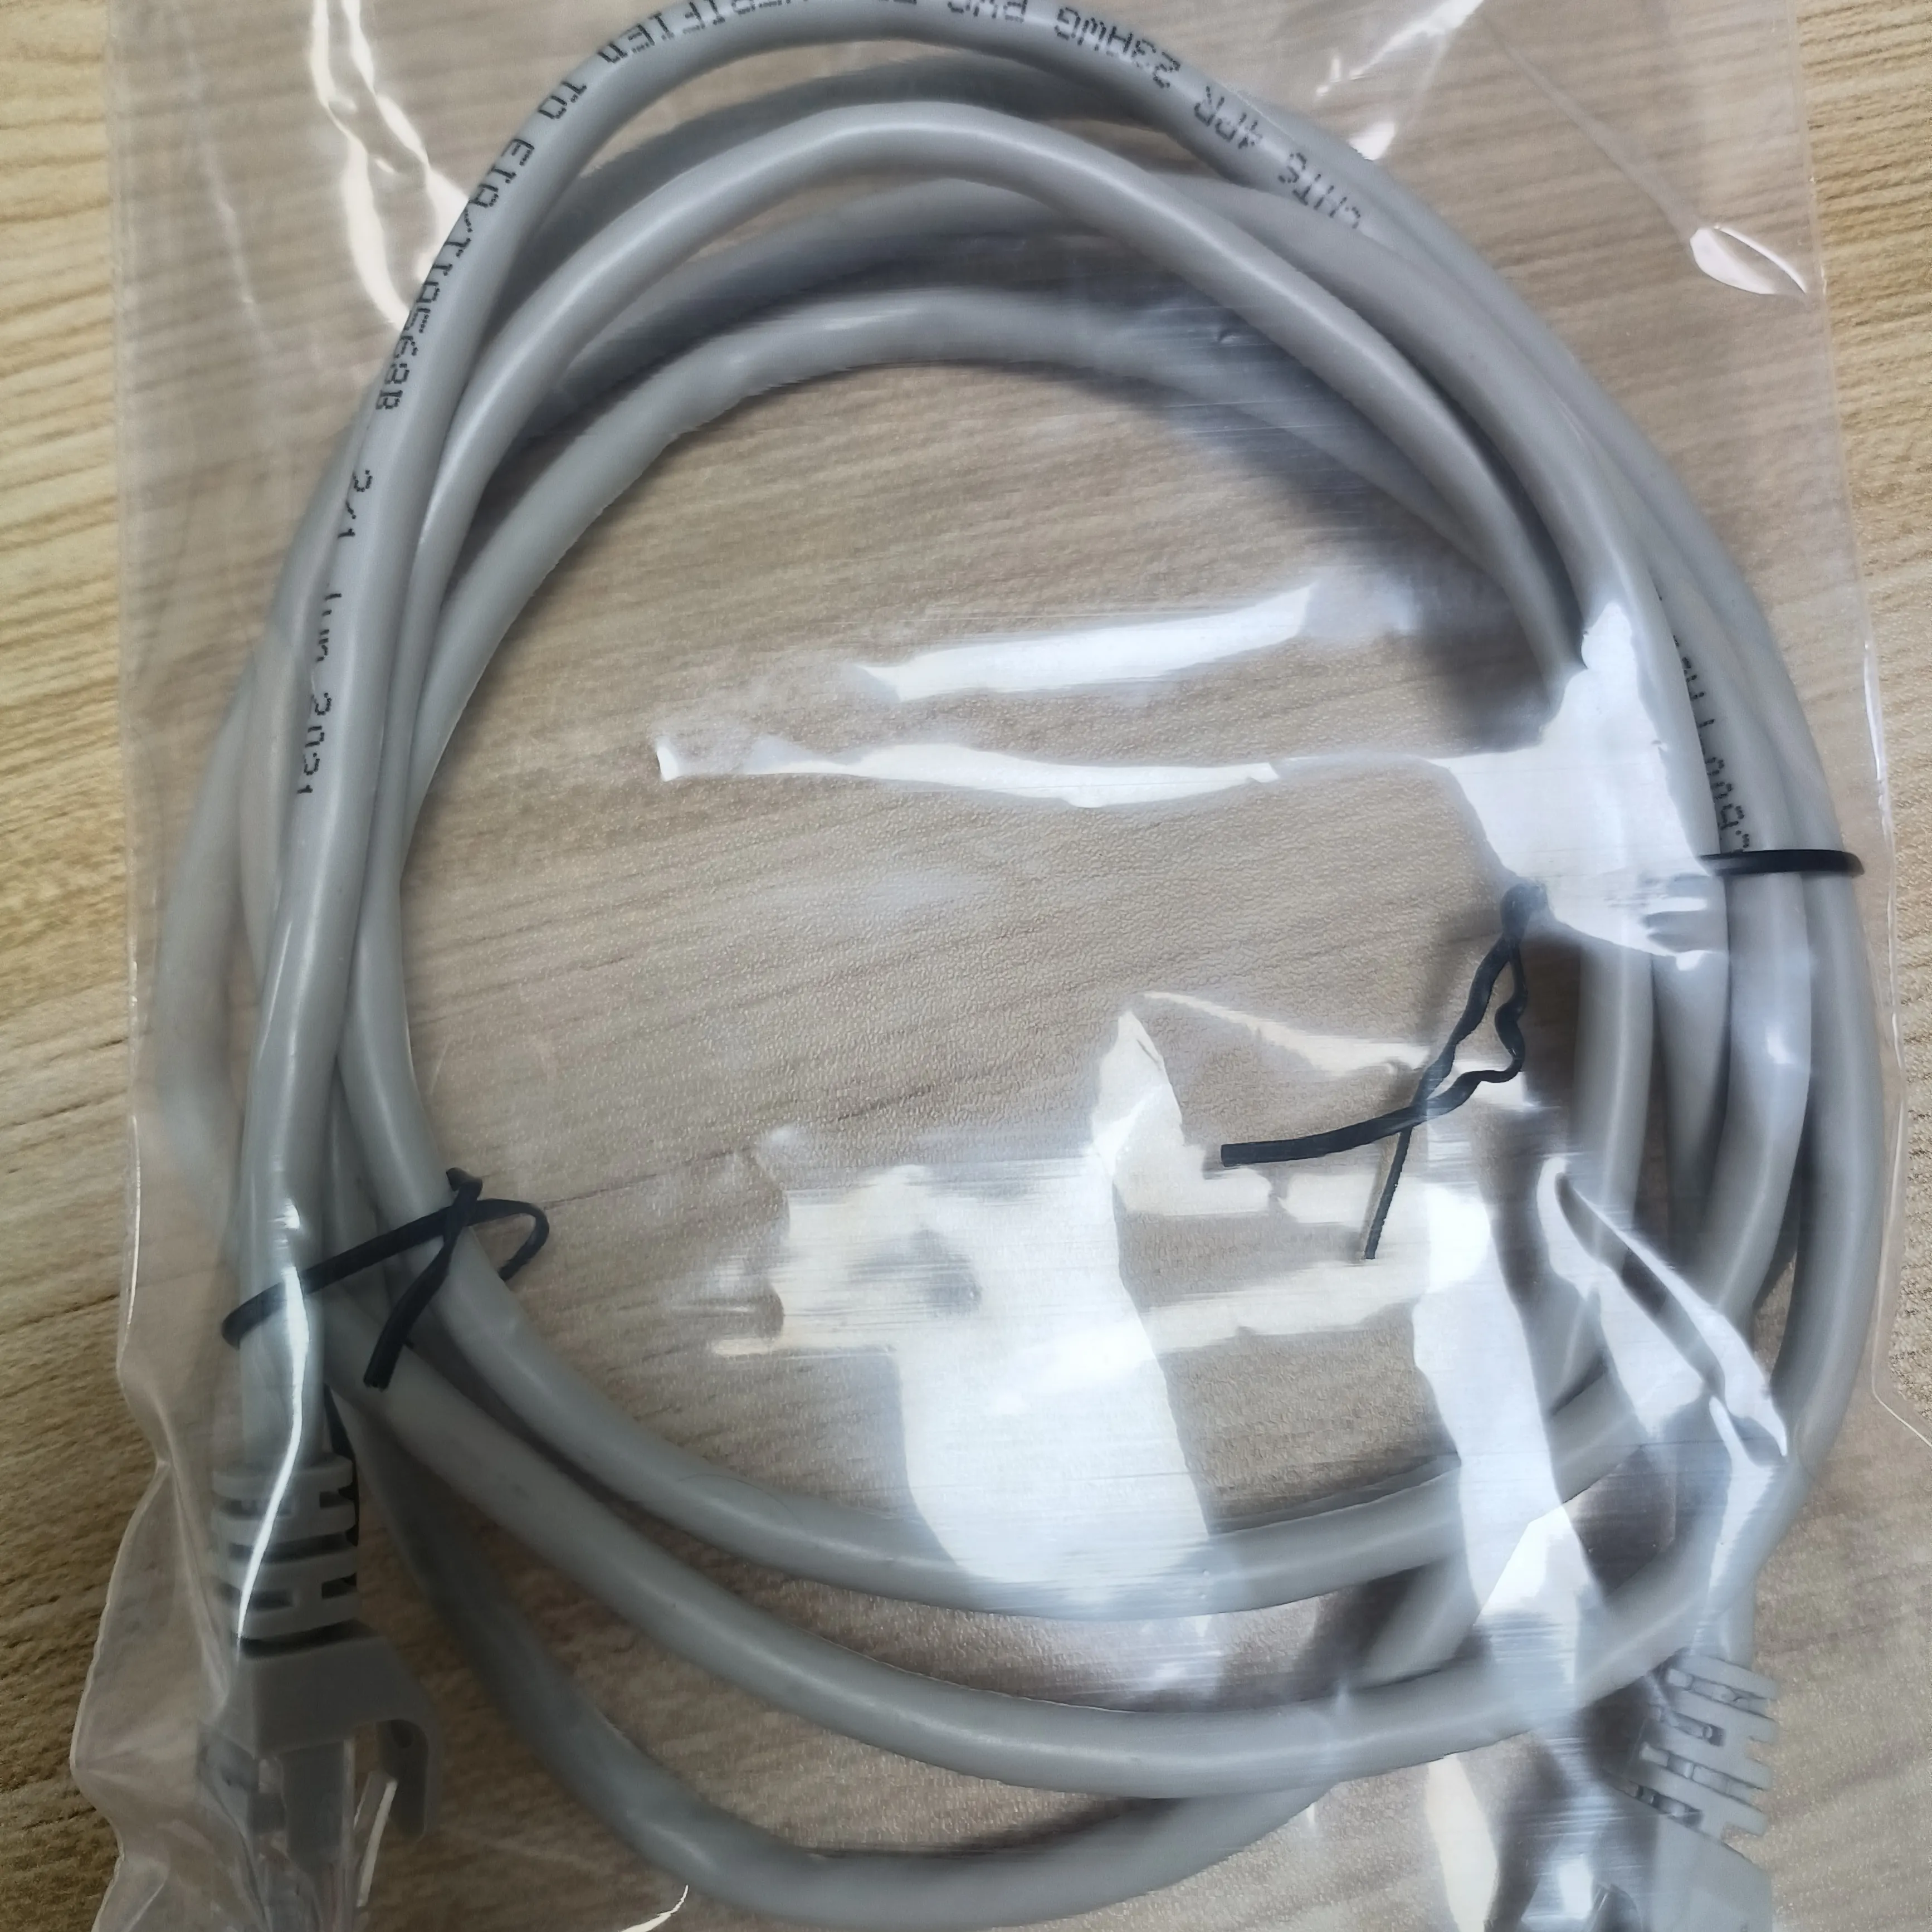 Chipsship Original and New 1 meter CAT5 e cables Communication Equipment high quality